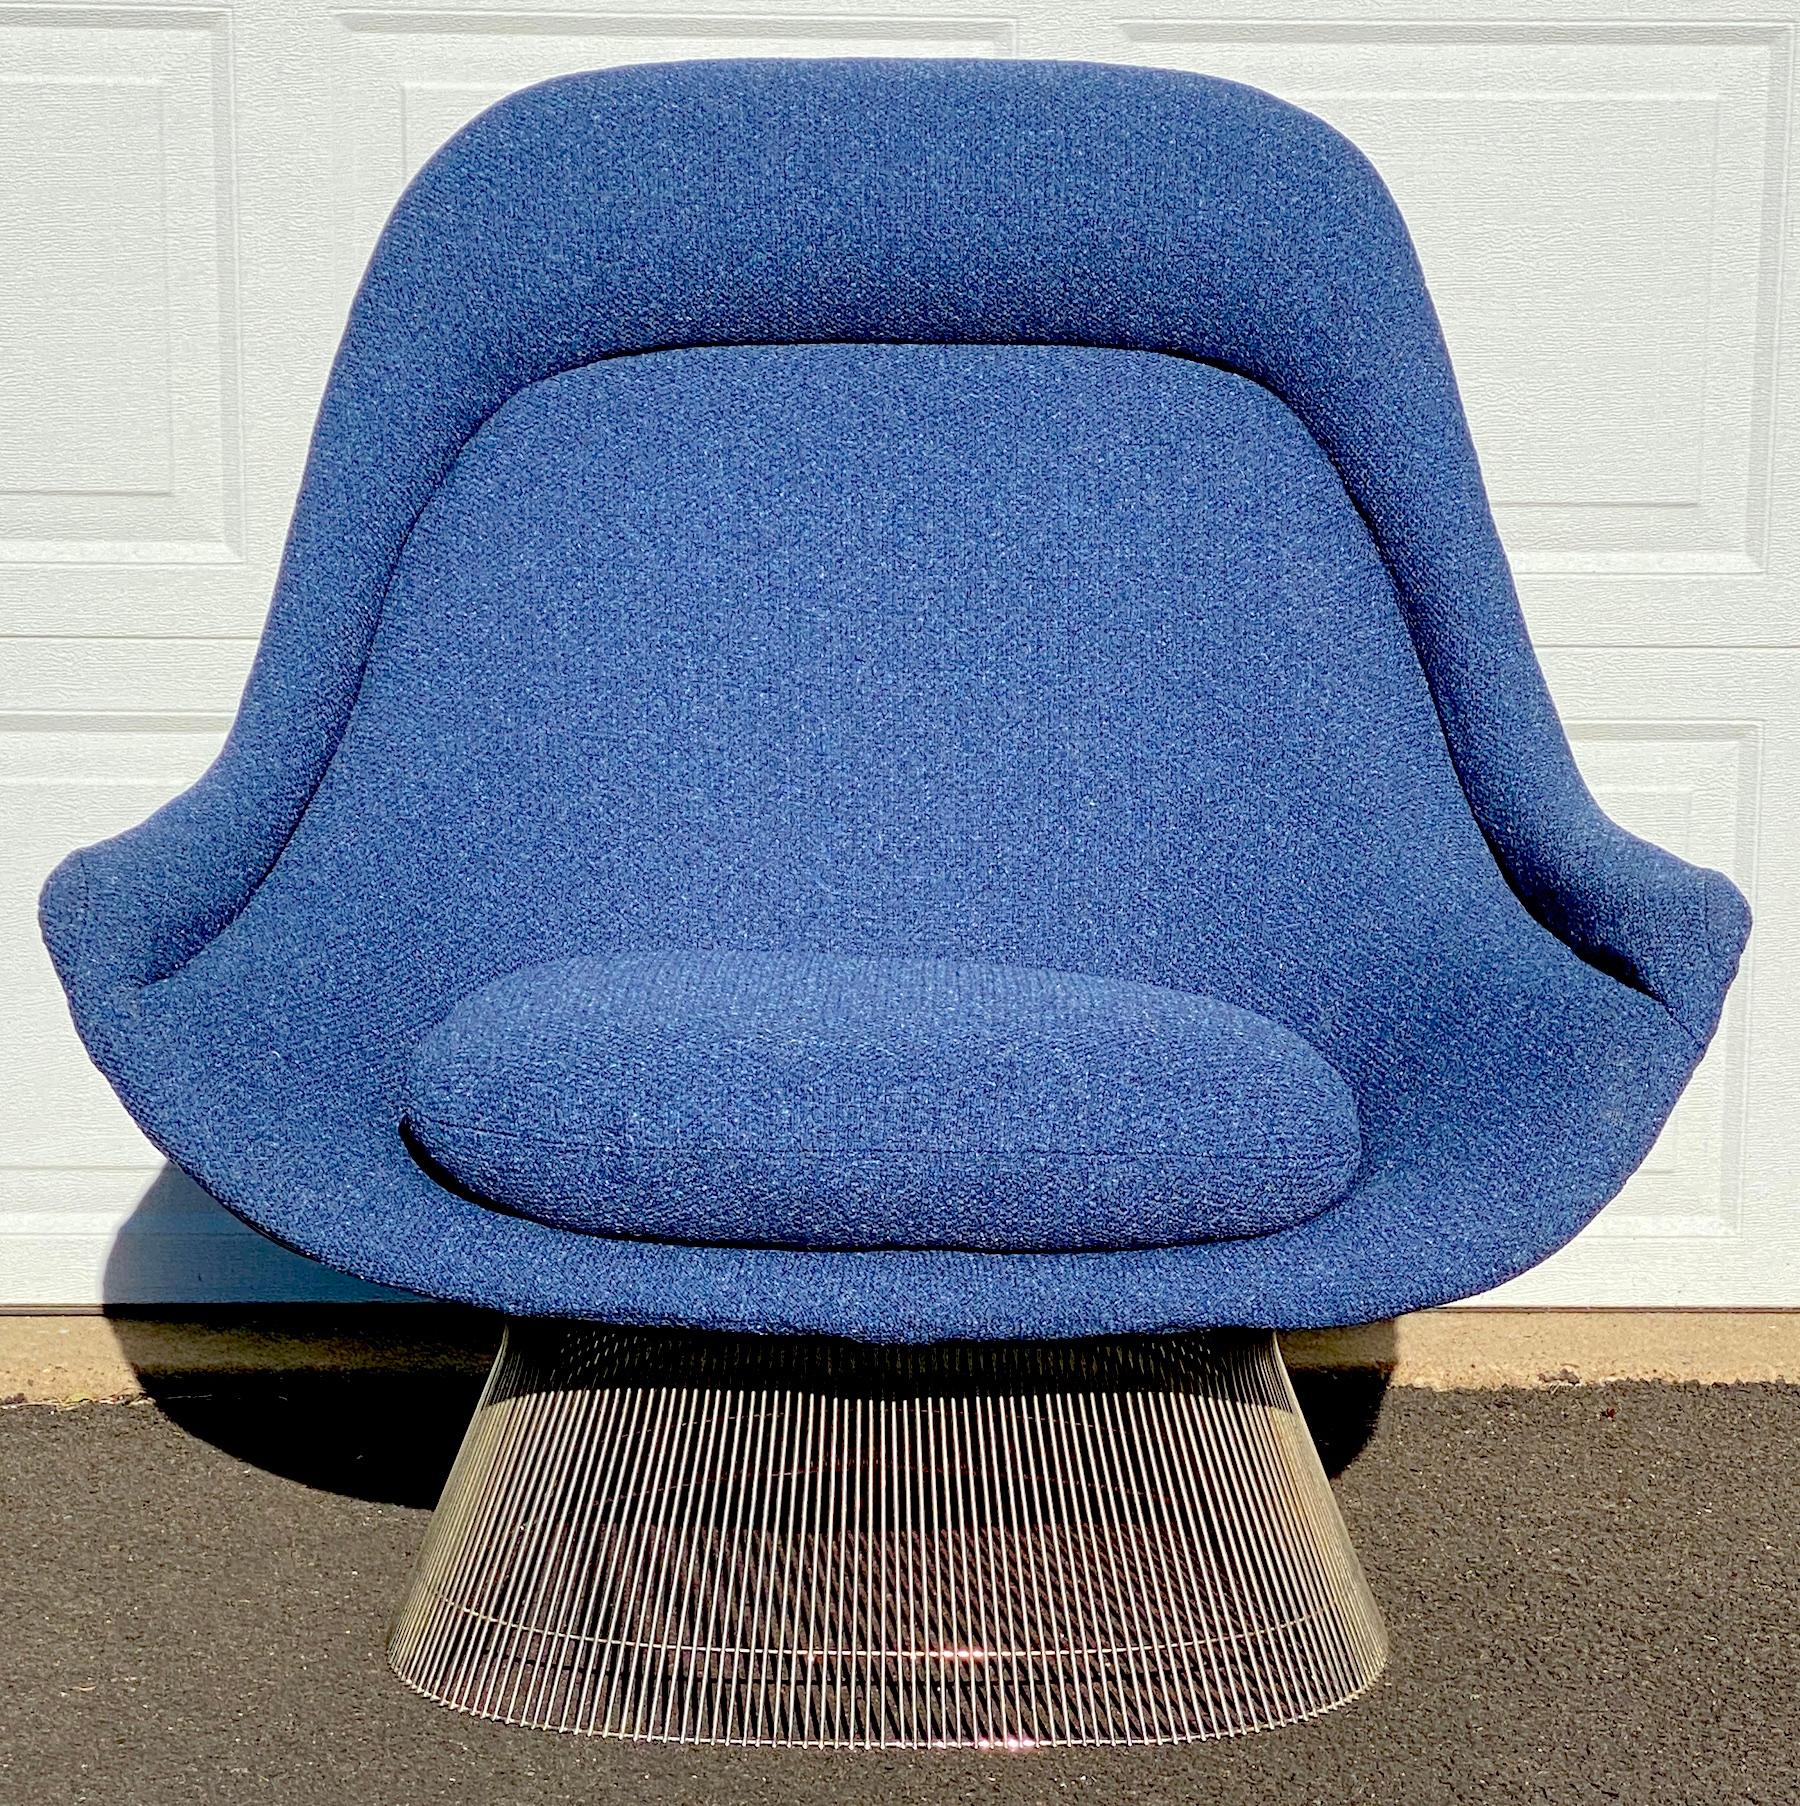 Model 1705 wire easy chair by Warren Platner for Knoll, circa 1970. A fine period example of the iconic model, newly upholstered in Knoll style kravet wool and cotton blend.



 